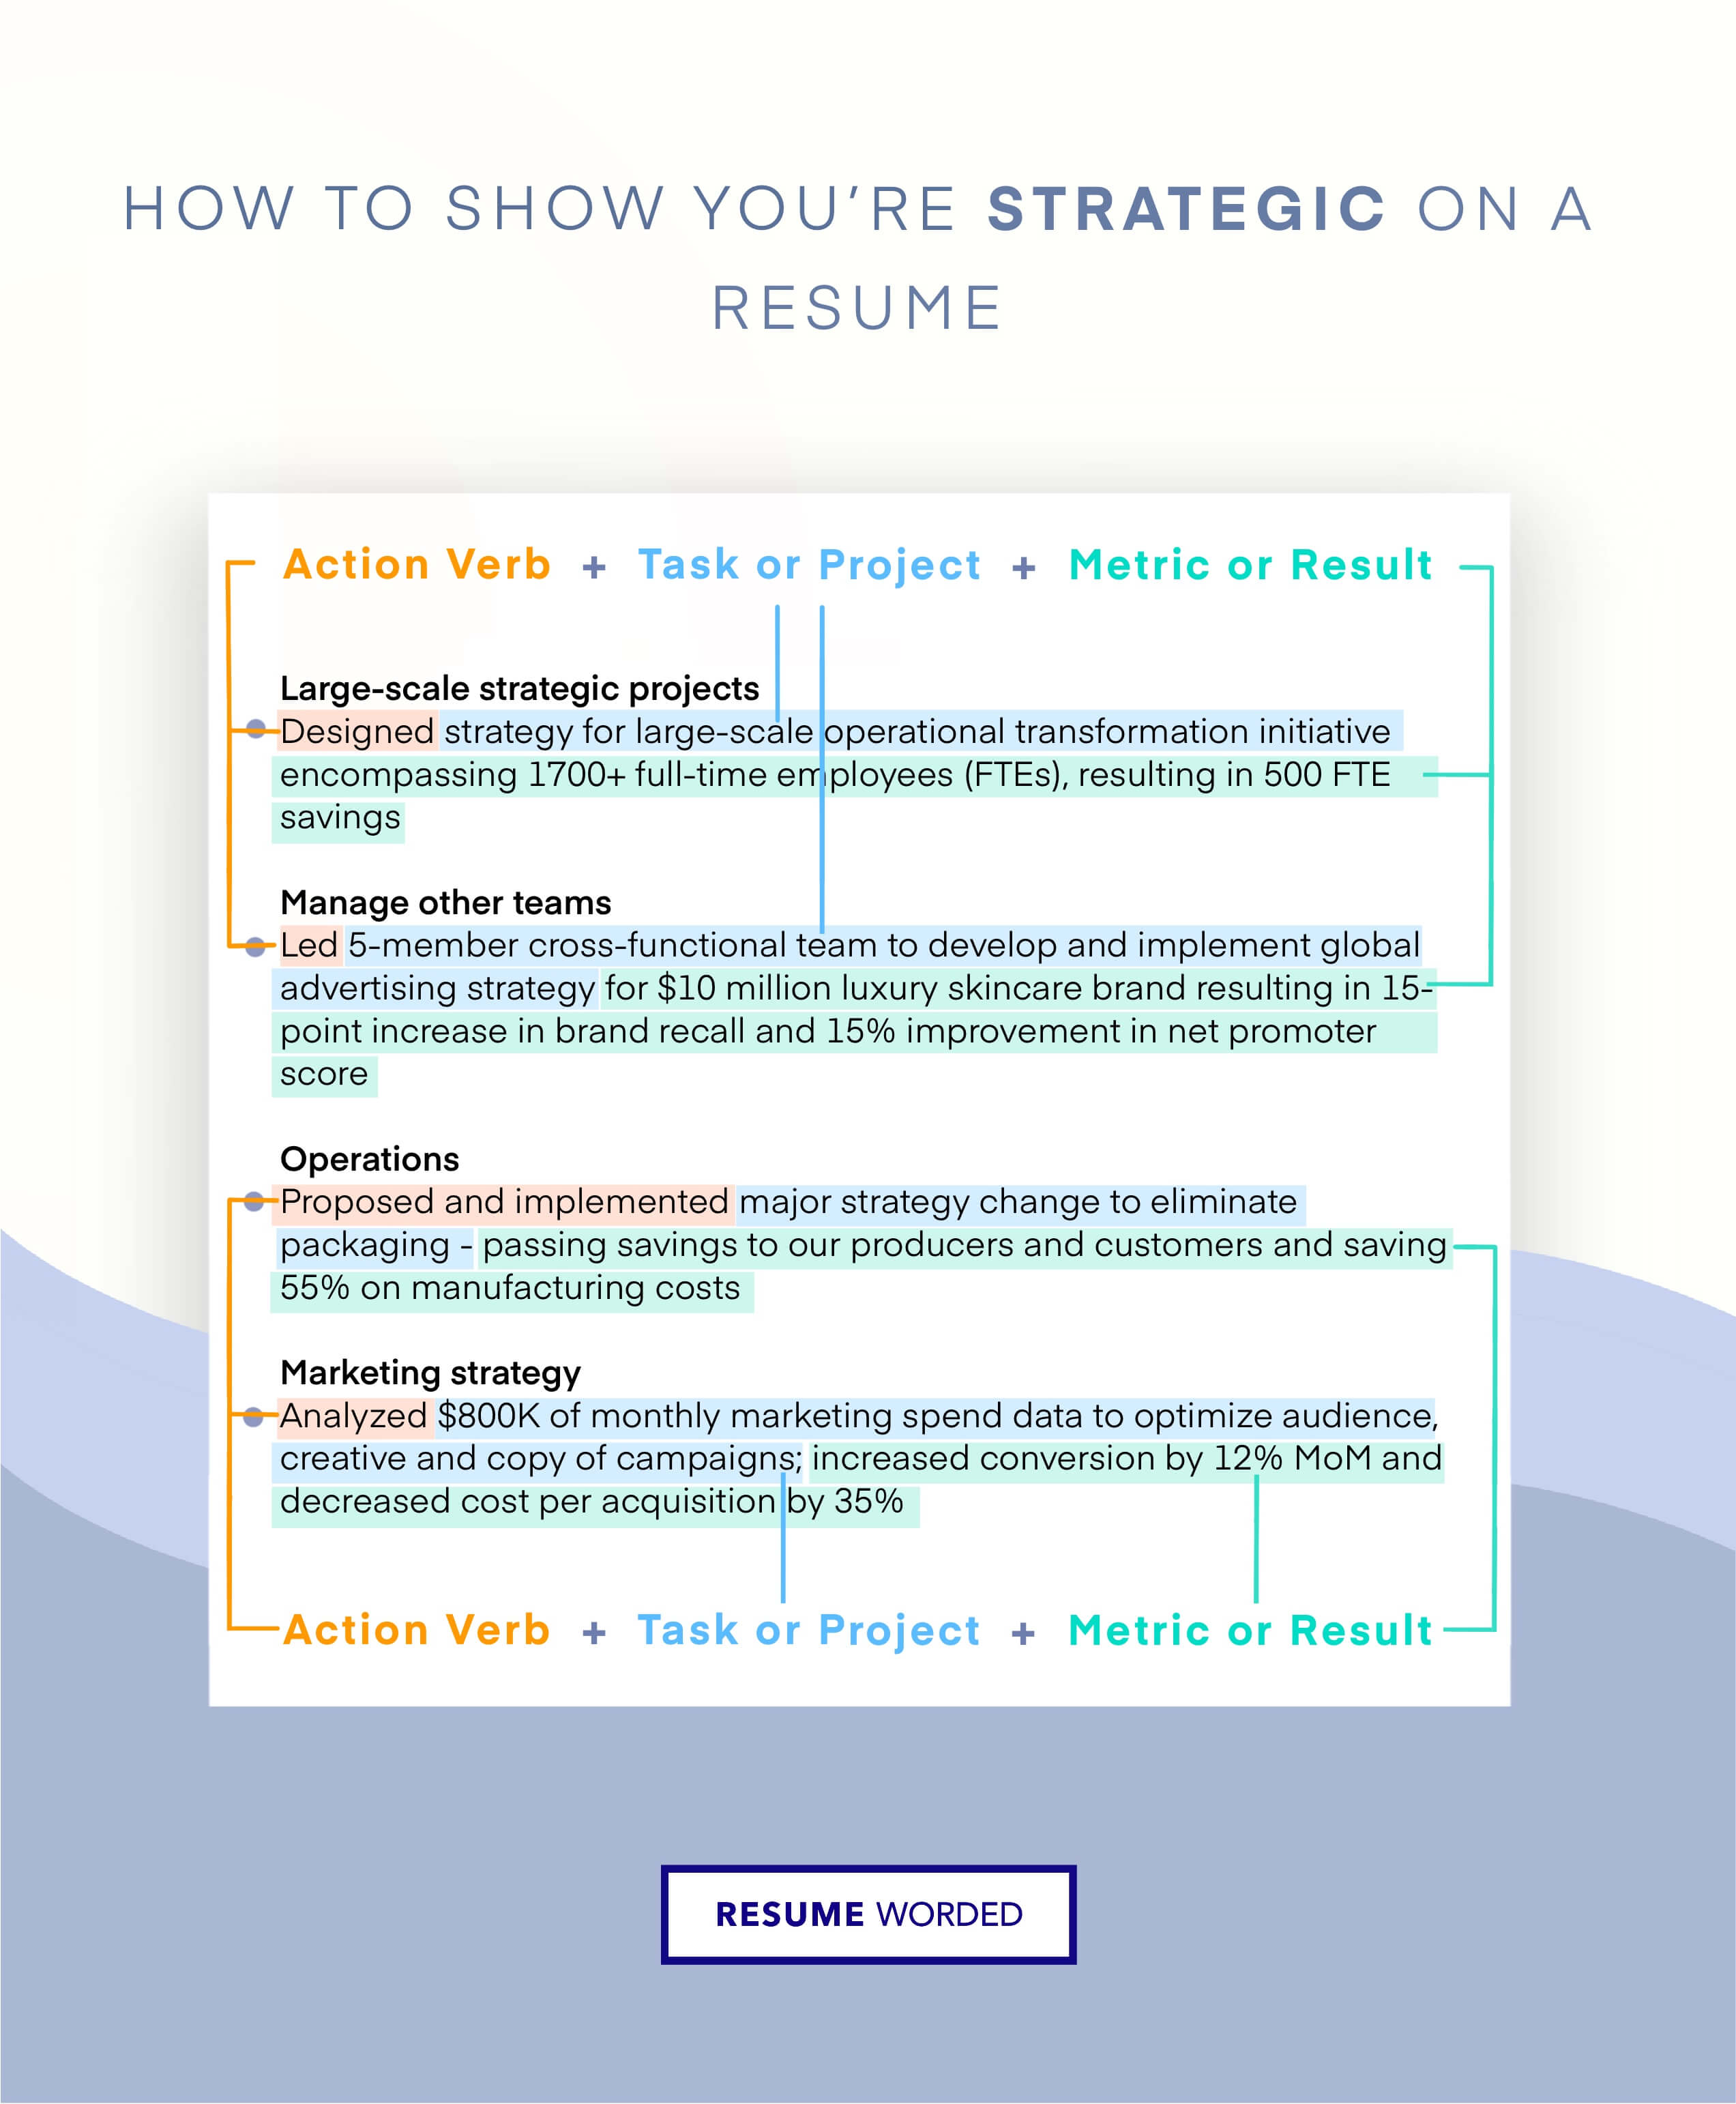 Demonstrate strategic financial planning abilities - Corporate Accountant CV